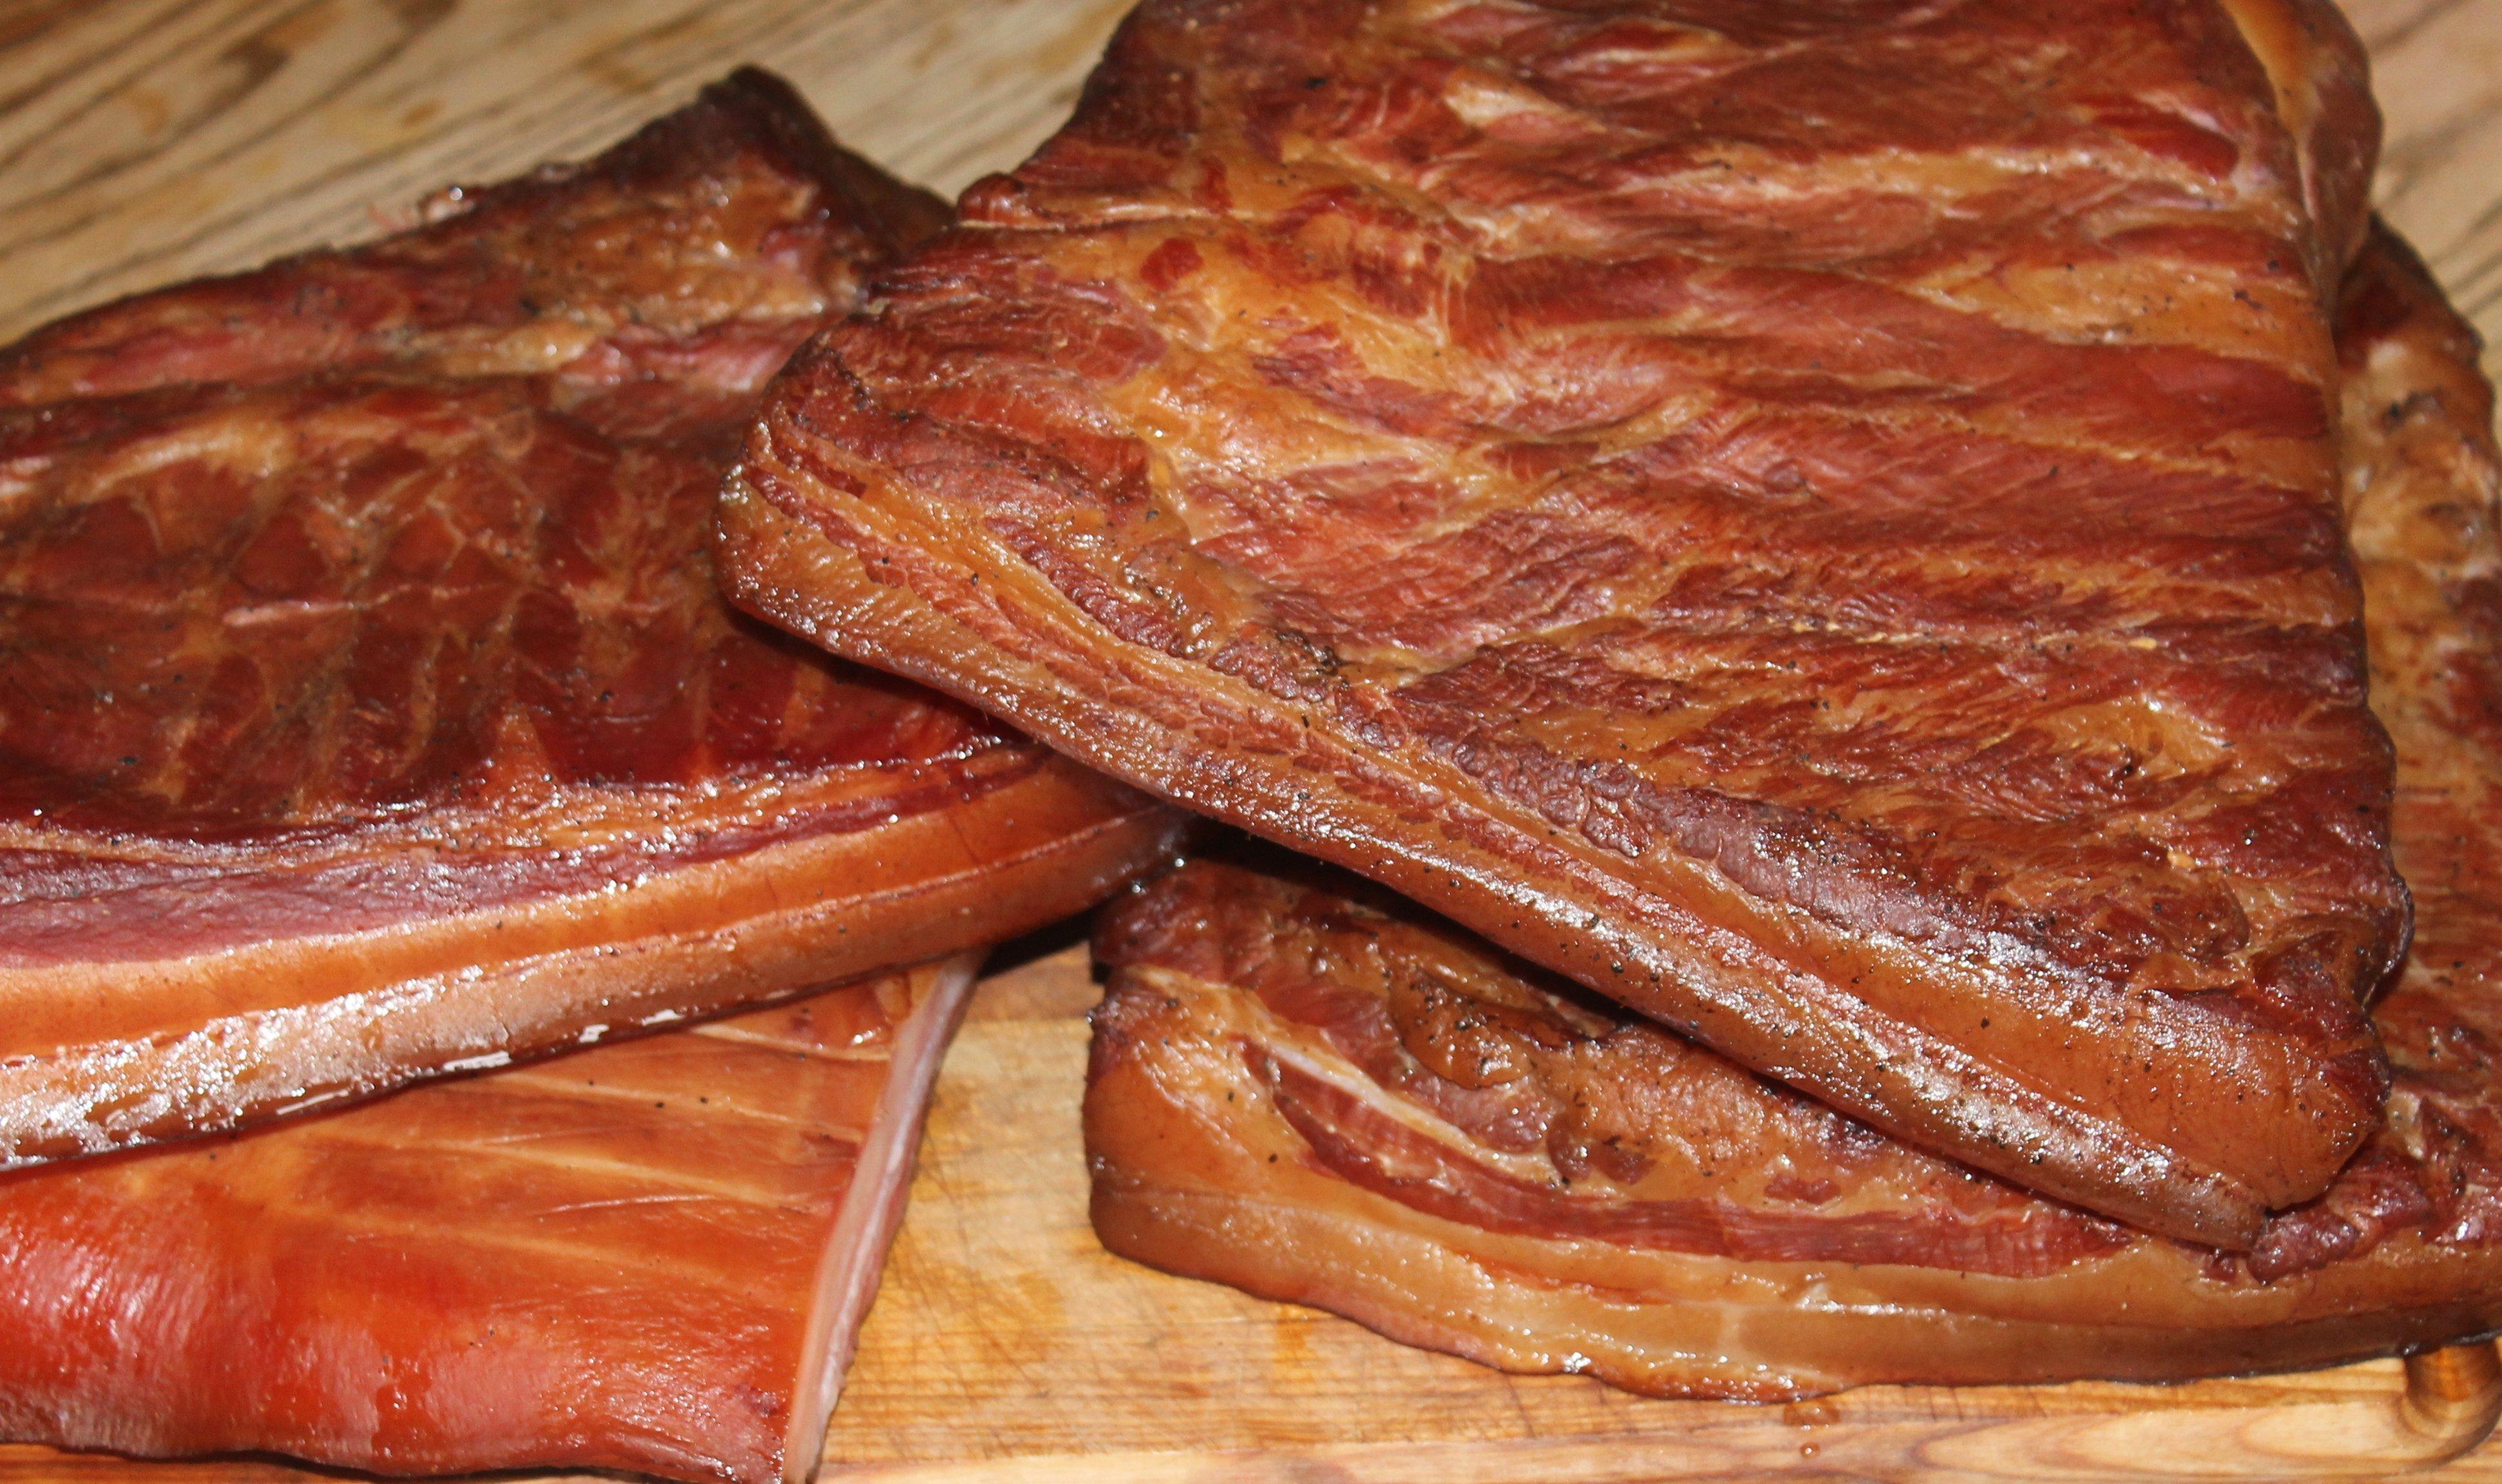 Bacon fresh from the smoker